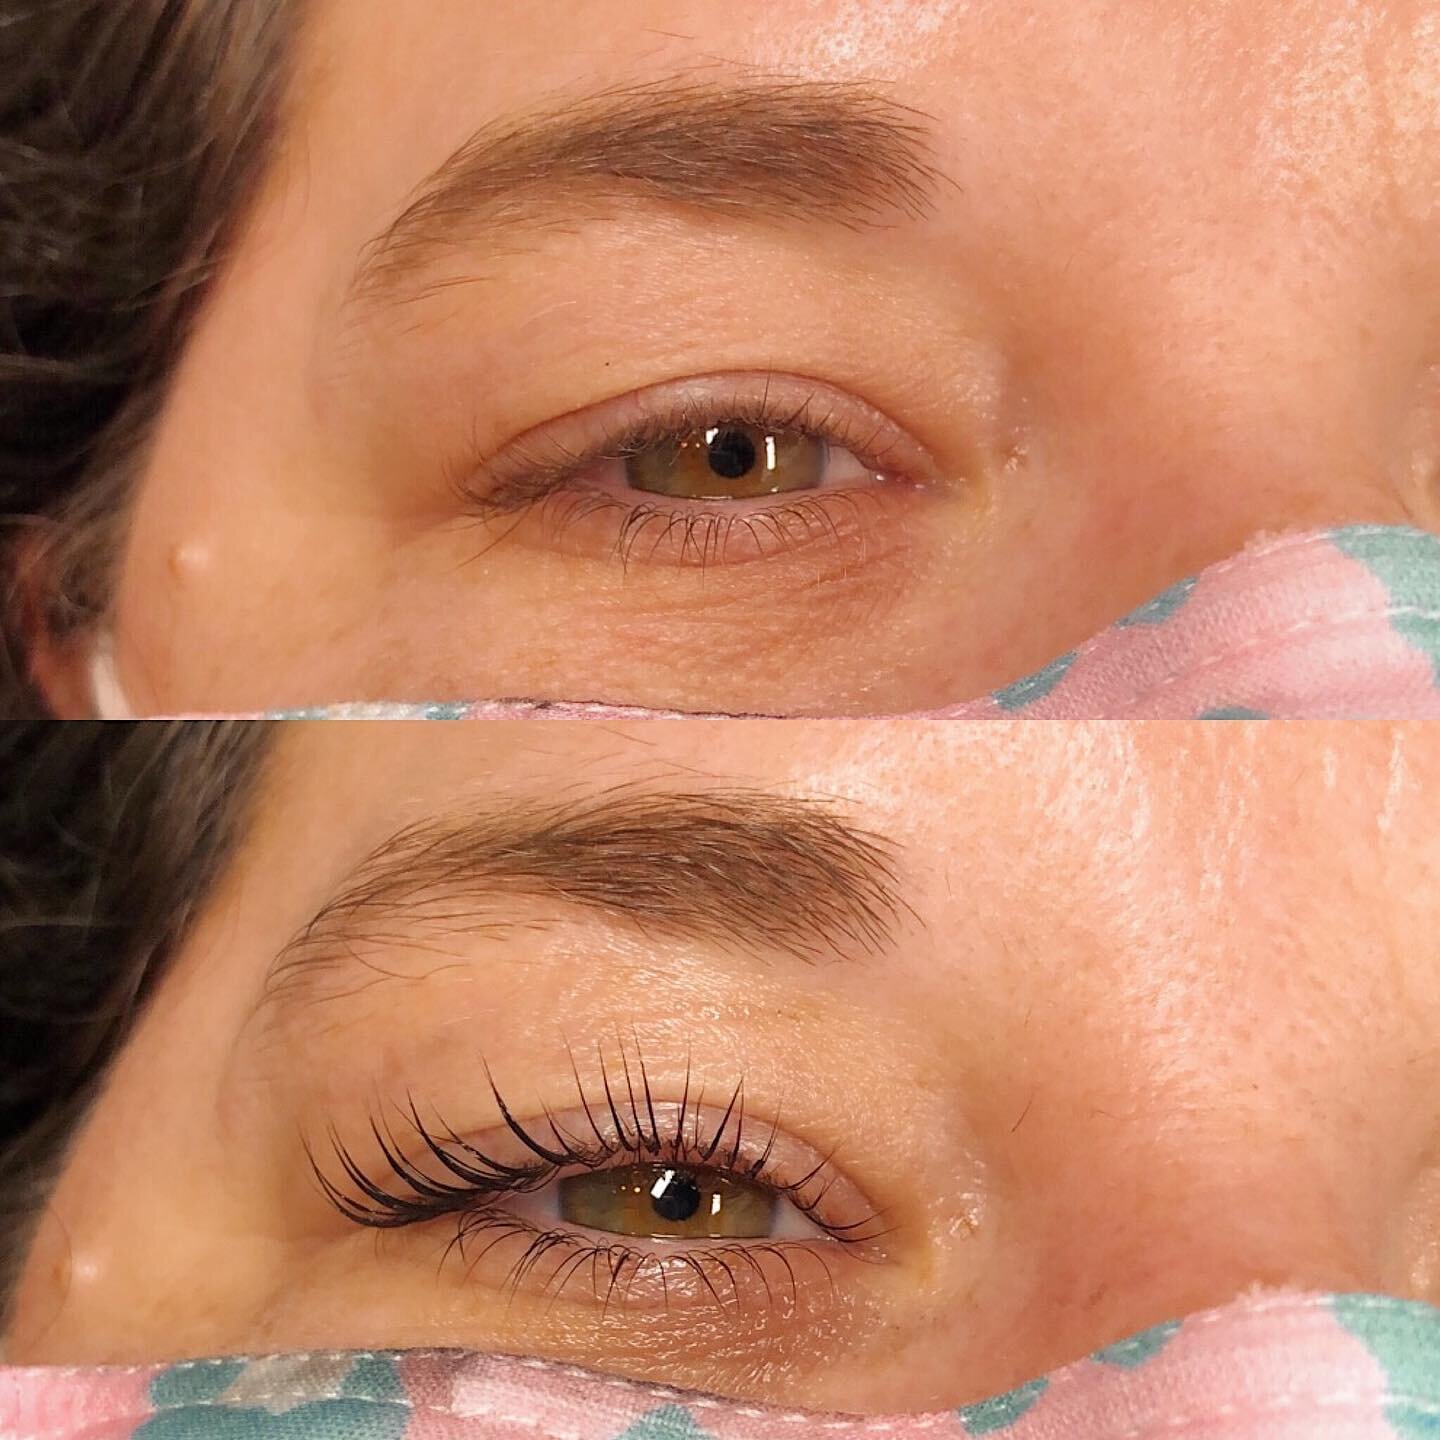 Last week i shared a hooded eye post. Just wanted to show that hooded eyes, don&rsquo;t always mean &ldquo;mature skin,&rdquo; and that &ldquo;mature skin,&rdquo; doesn&rsquo;t always mean hooded eye. I&rsquo;ve also learned that a handful of people 